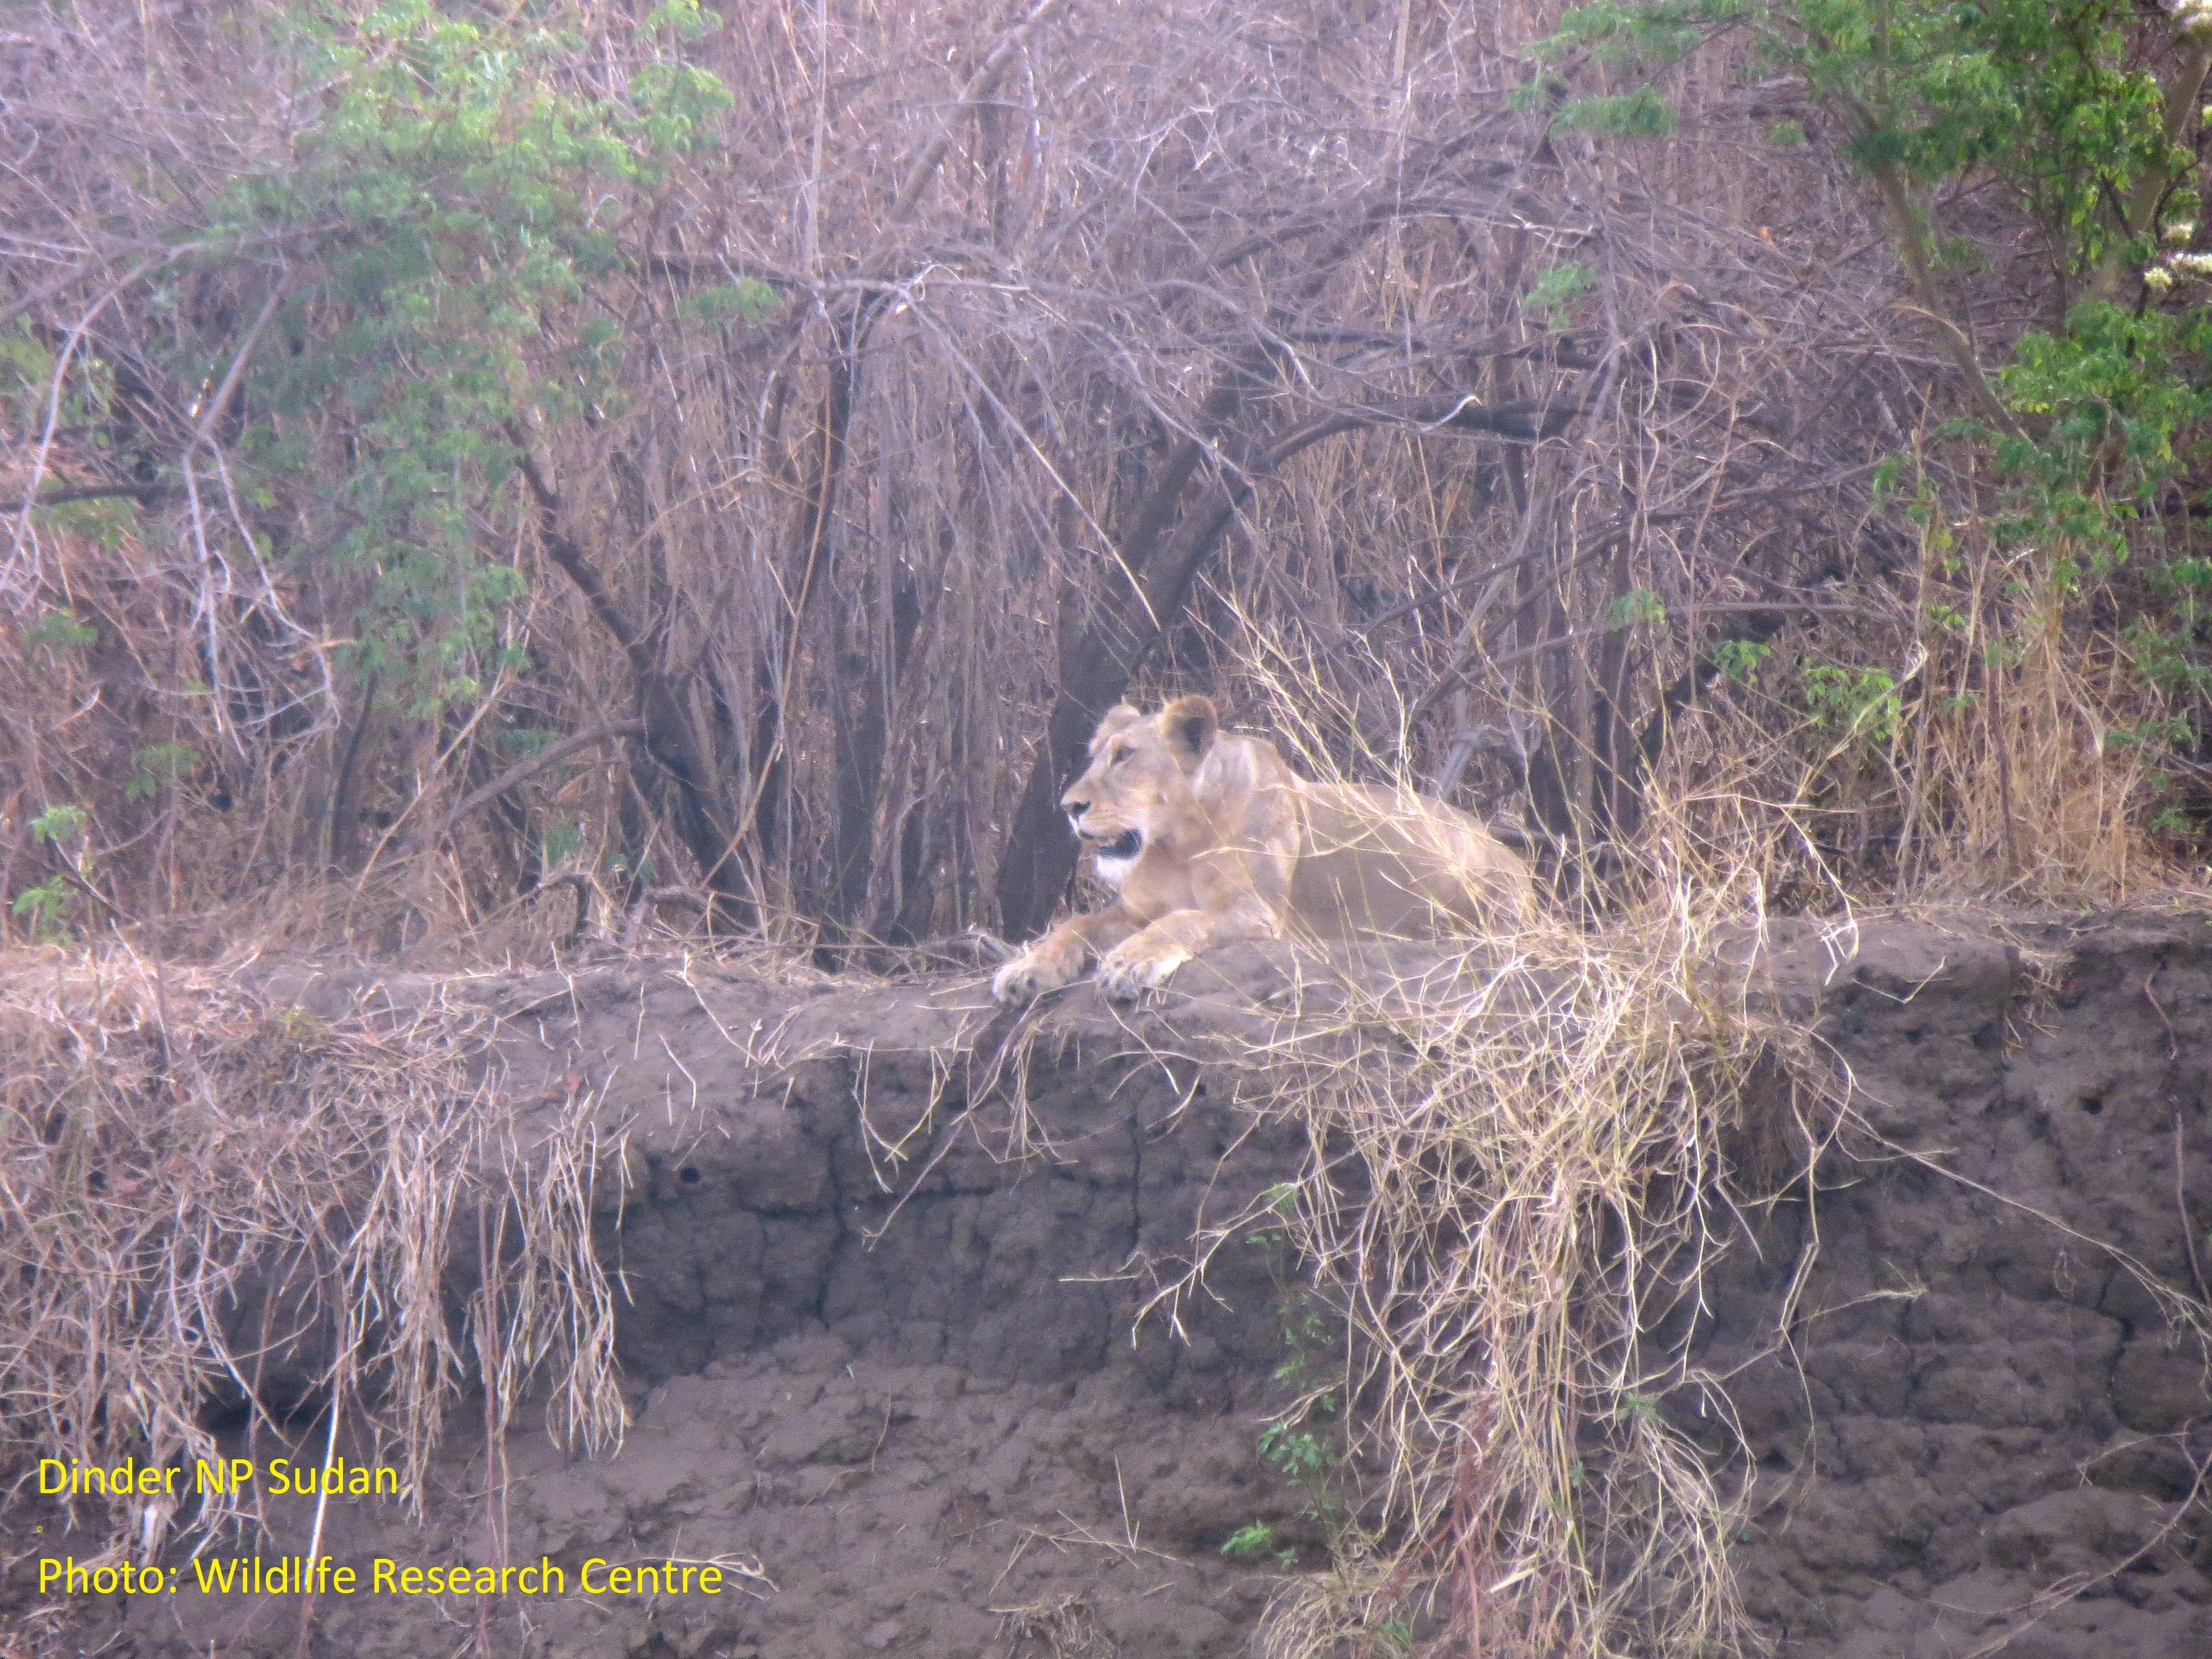 Baseline survey and needs assessment of Sudan's lions